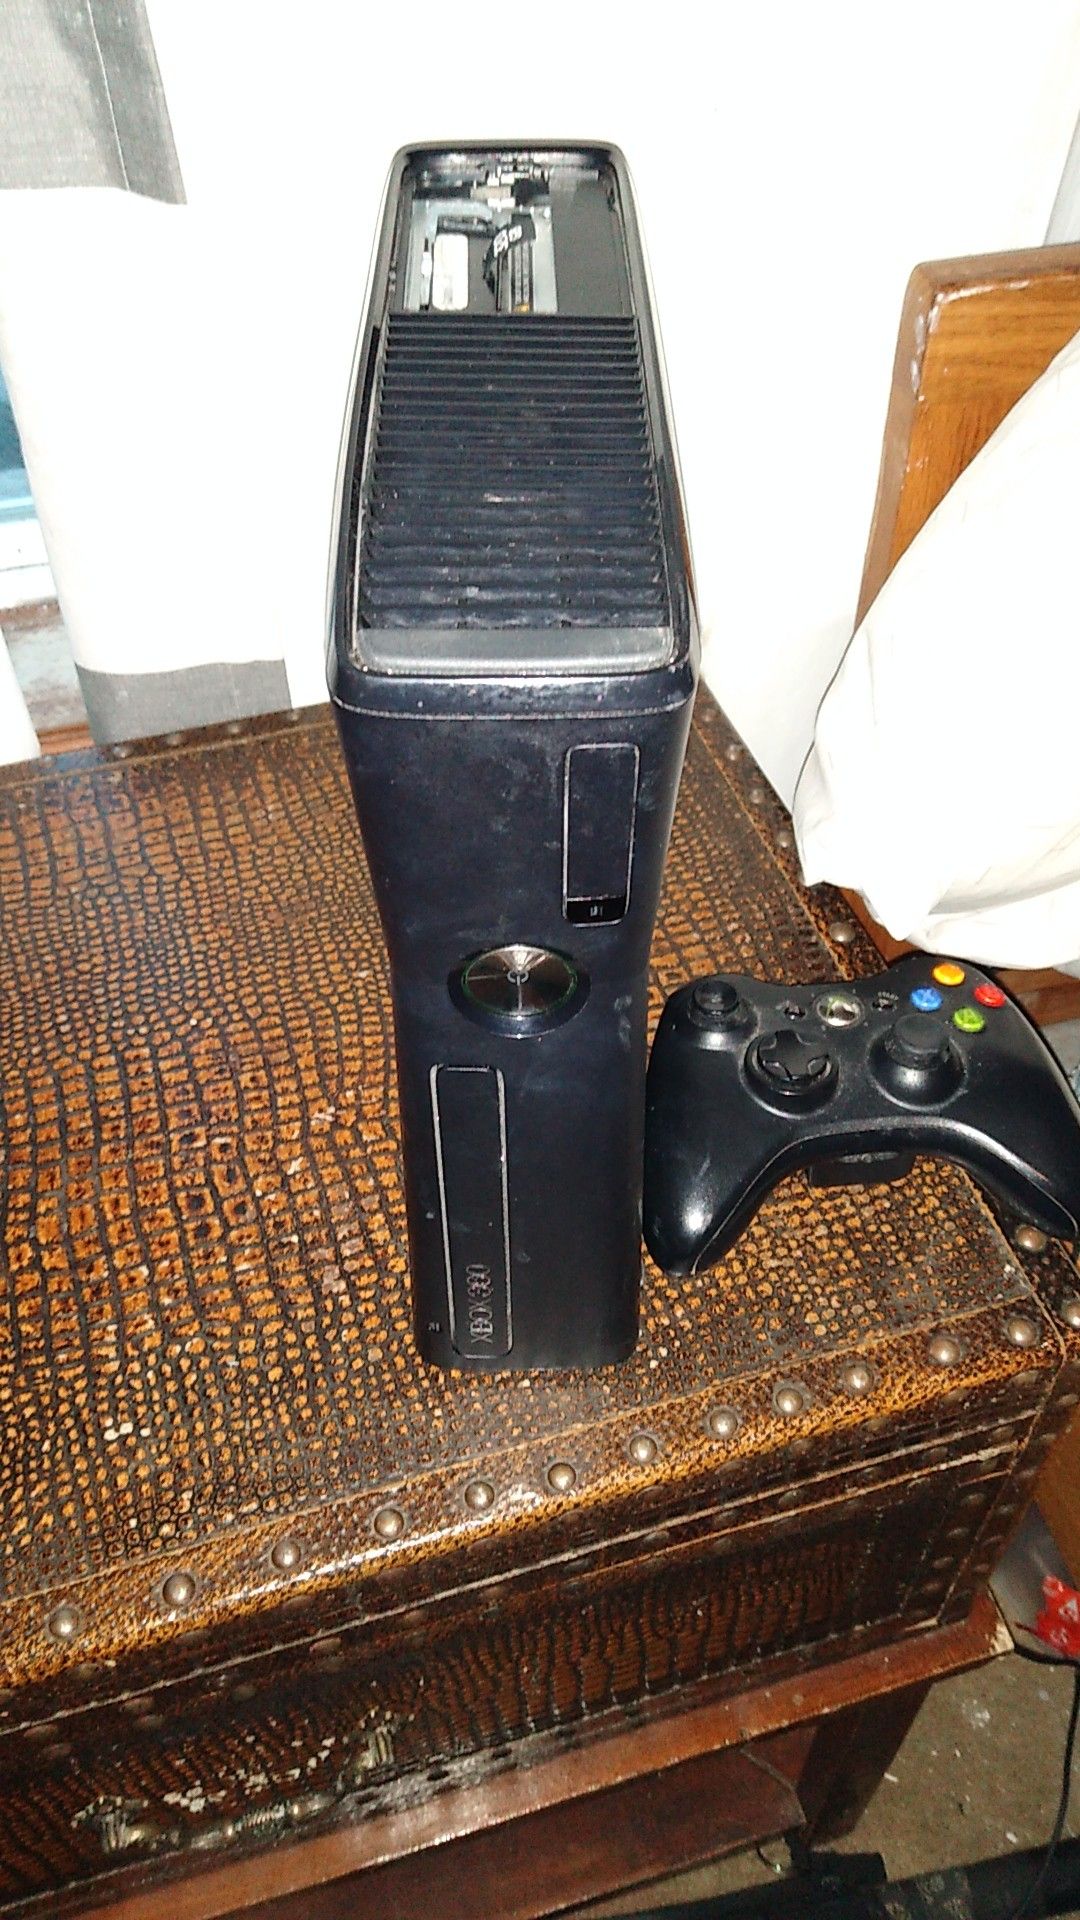 Xbox 360 + controller and 60+ games downloaded+ components needed